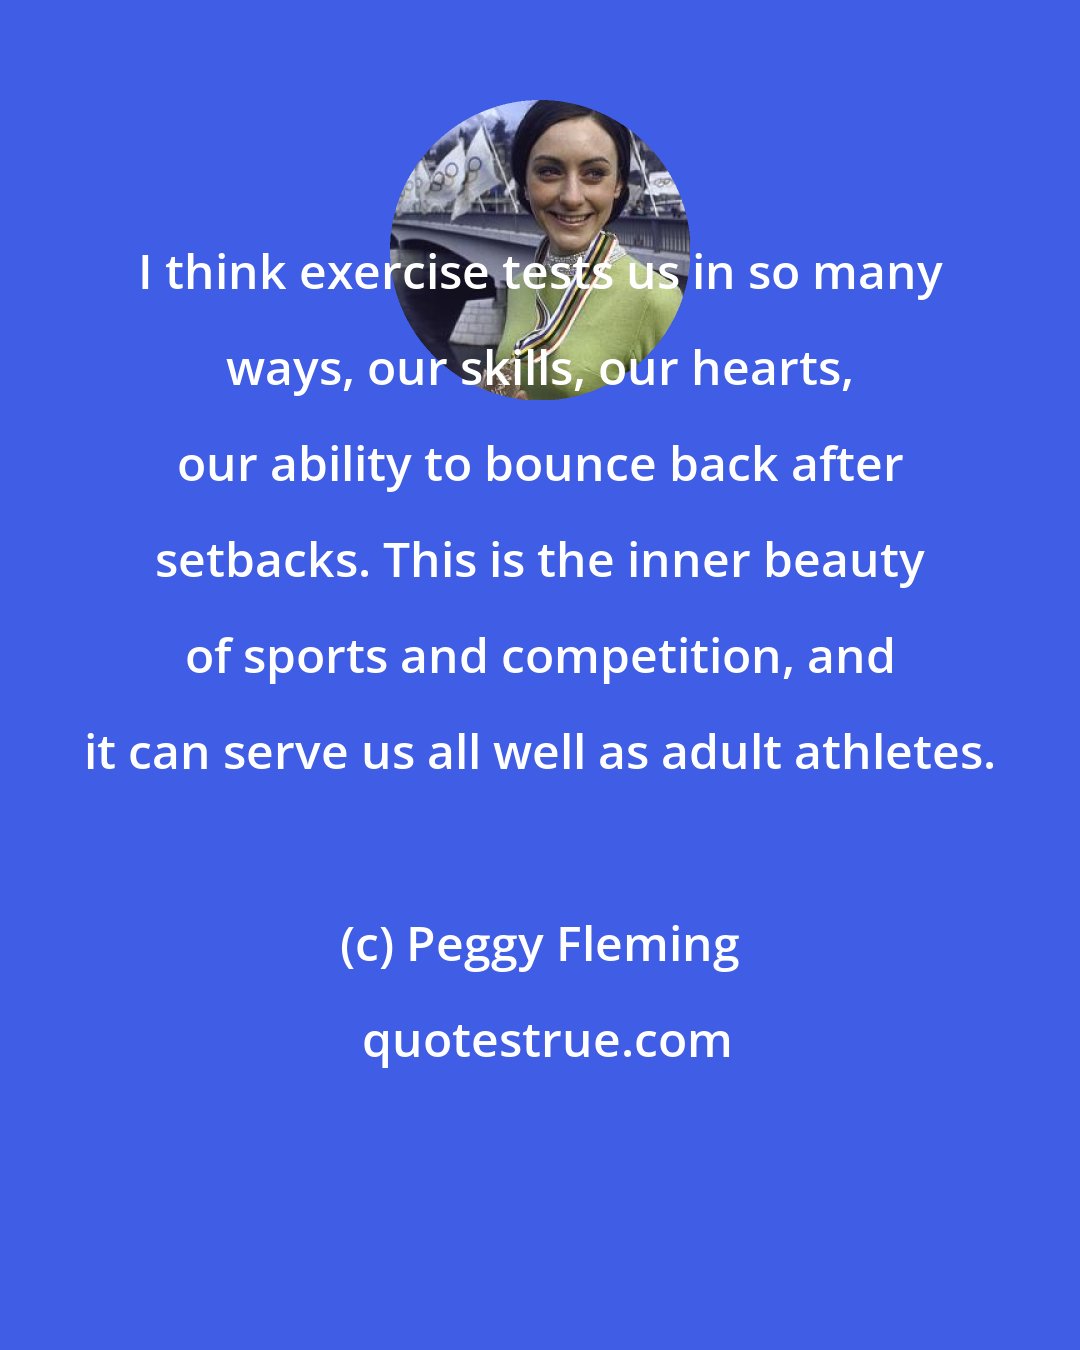 Peggy Fleming: I think exercise tests us in so many ways, our skills, our hearts, our ability to bounce back after setbacks. This is the inner beauty of sports and competition, and it can serve us all well as adult athletes.